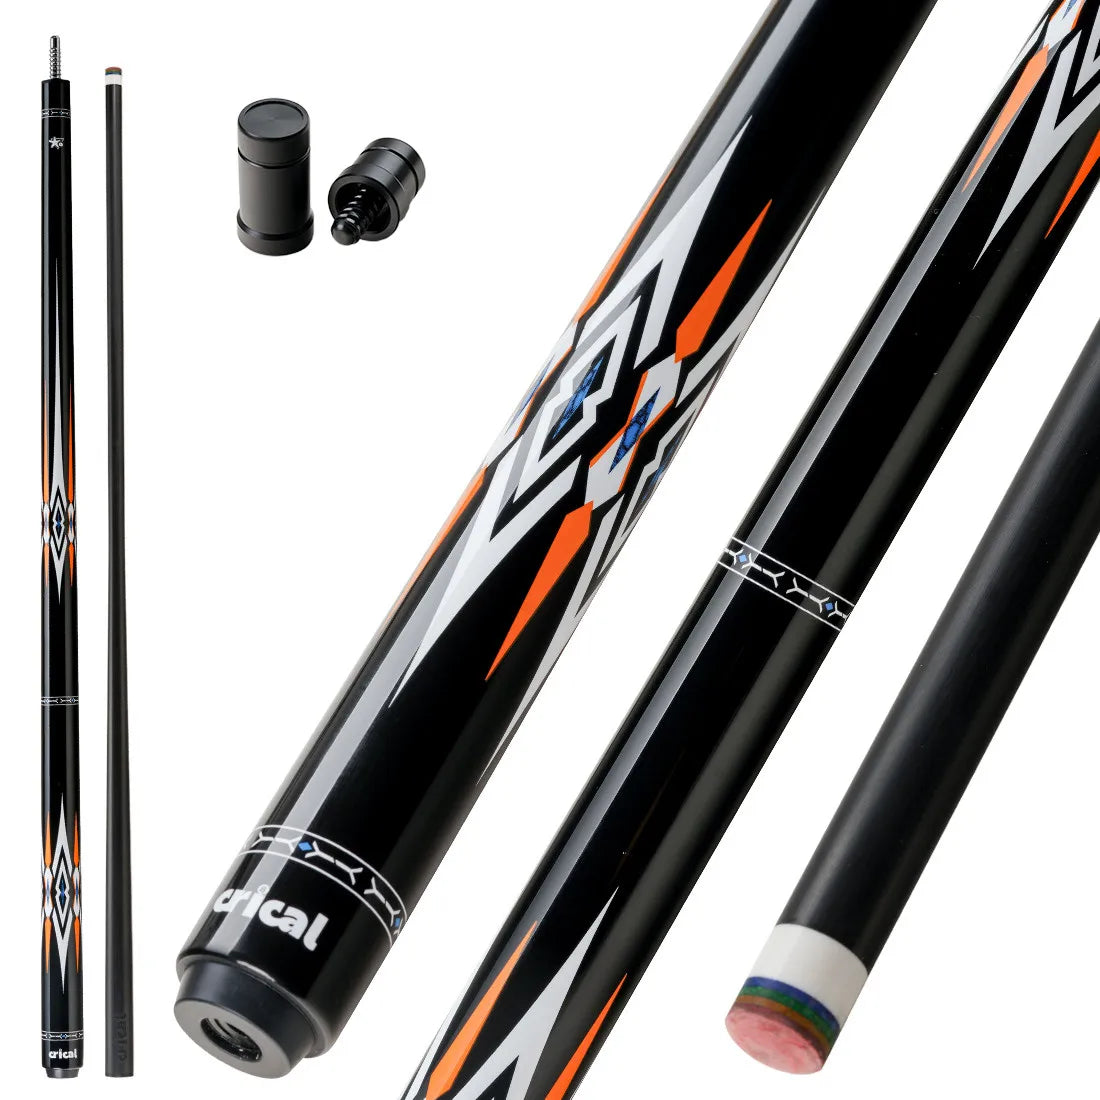 CRICAL Carbon Fiber Pool Cue Stick 58" Billiard Cue Sticks Professional Low Deflection Pool Sticks with 3/8 * 8 Pin Joint and 12